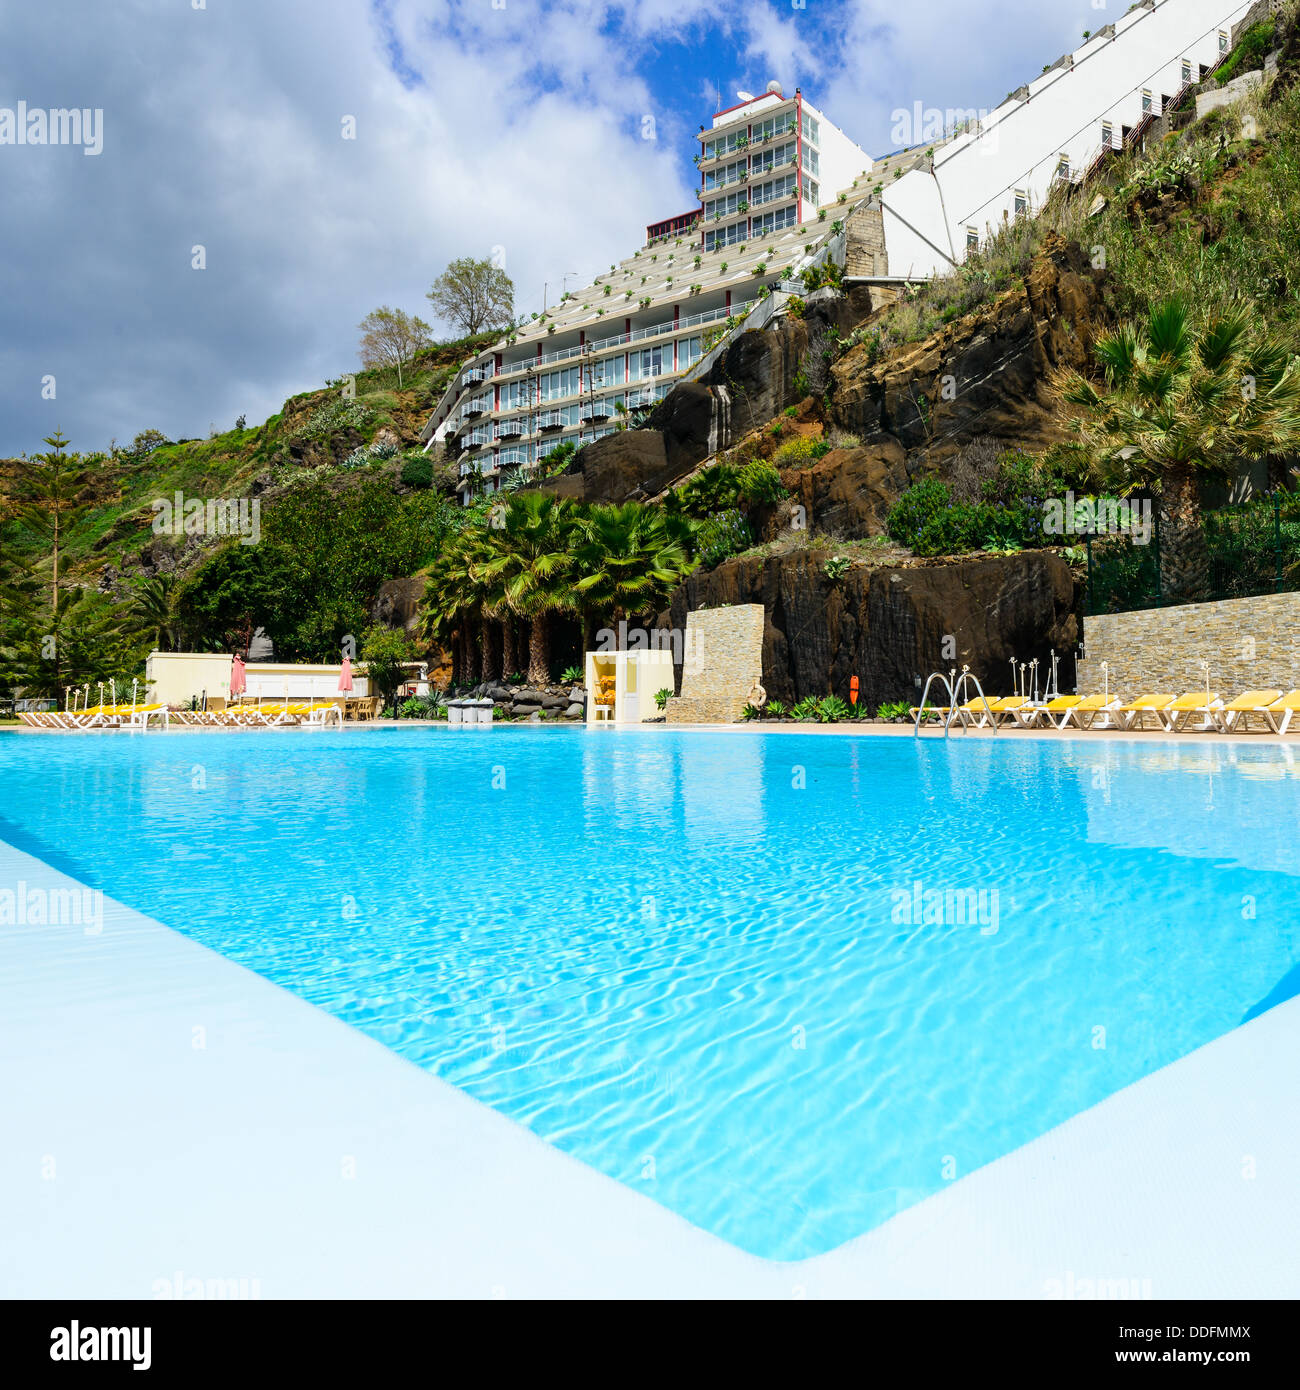 Swimming pool and hotel, Funchal, Madeira Stock Photo